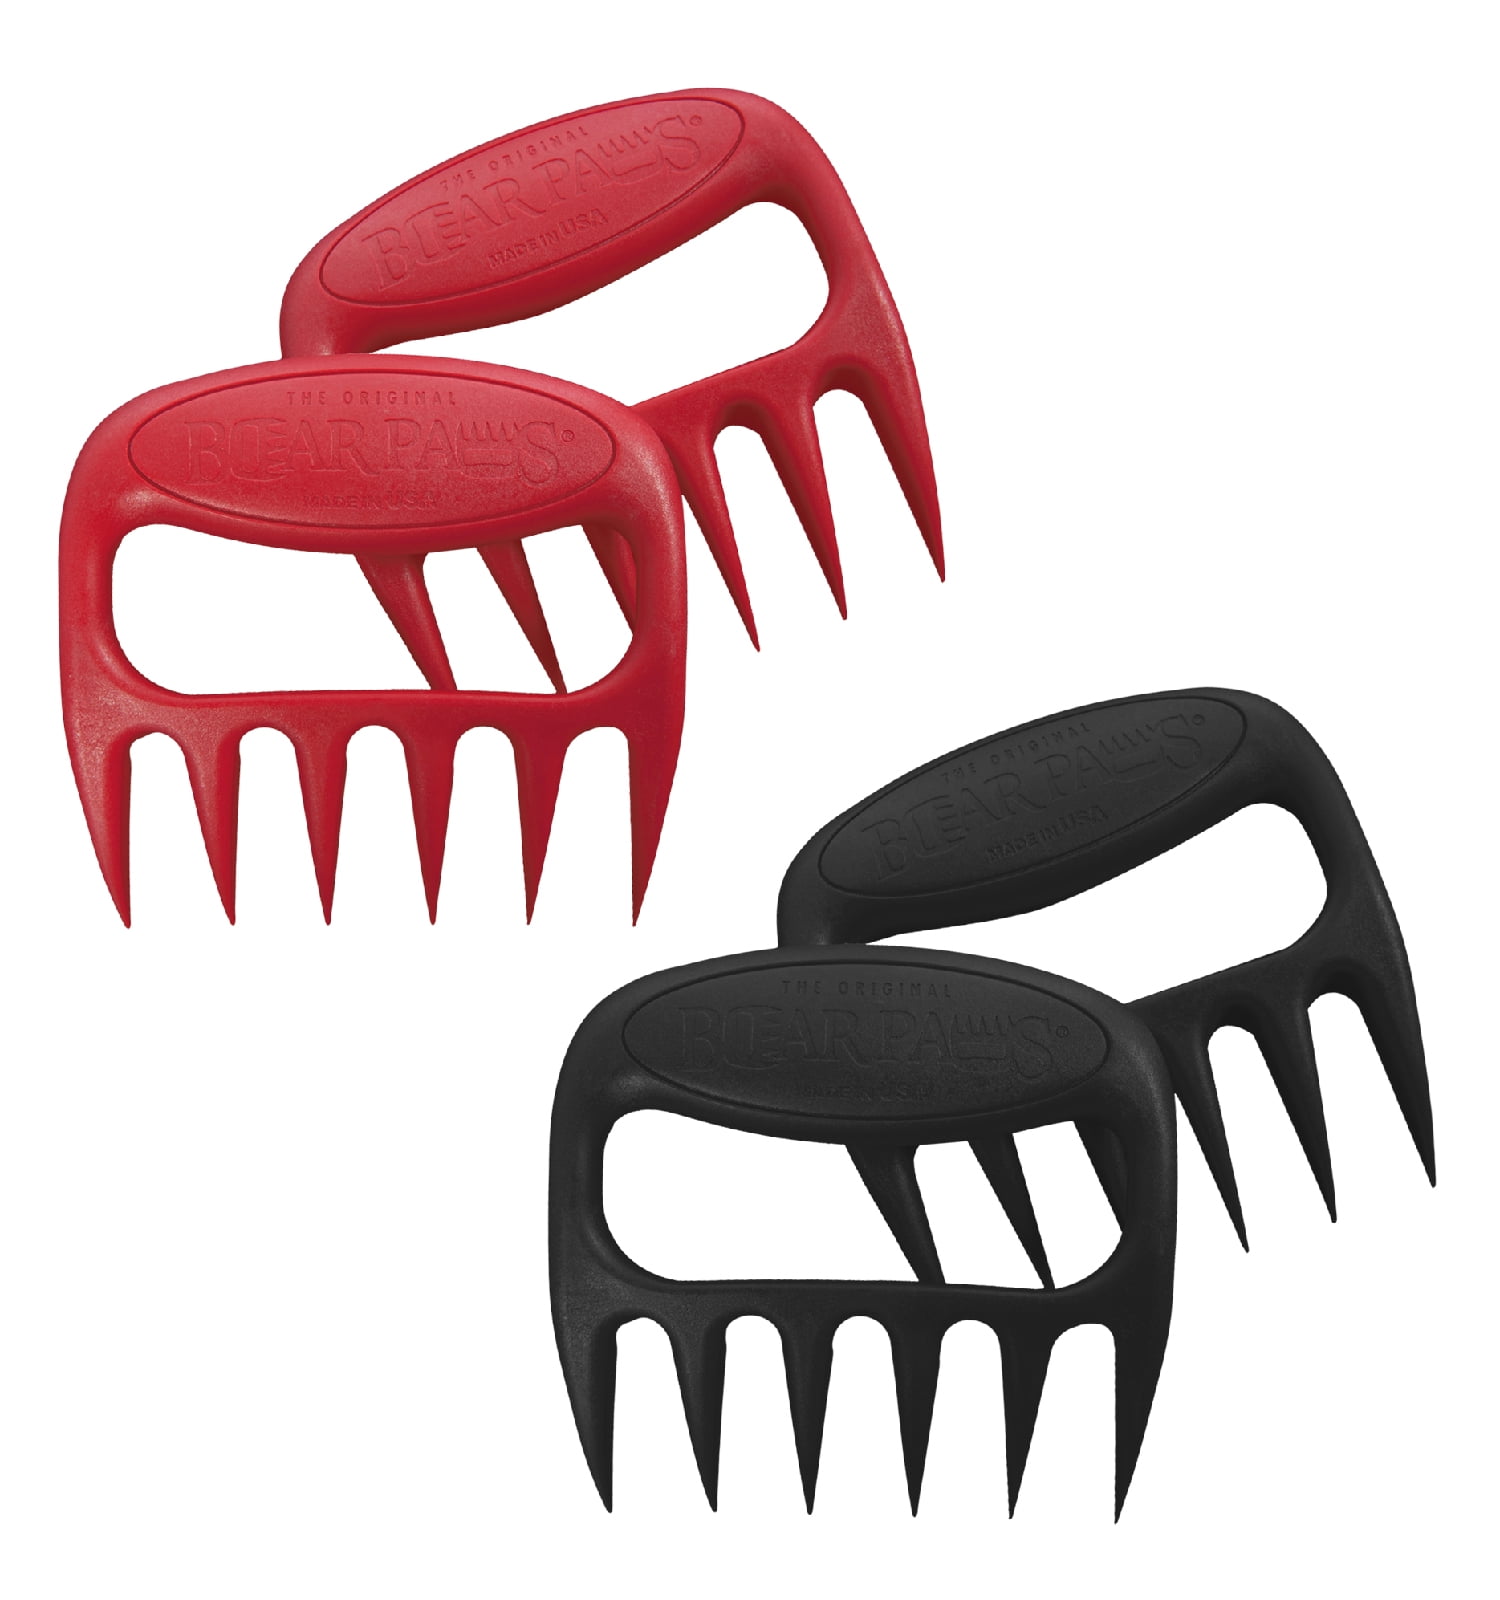 BBQ Meat 2 Set Shredder Bear Paws Shredder Claws Lift Handle and Shred Meats